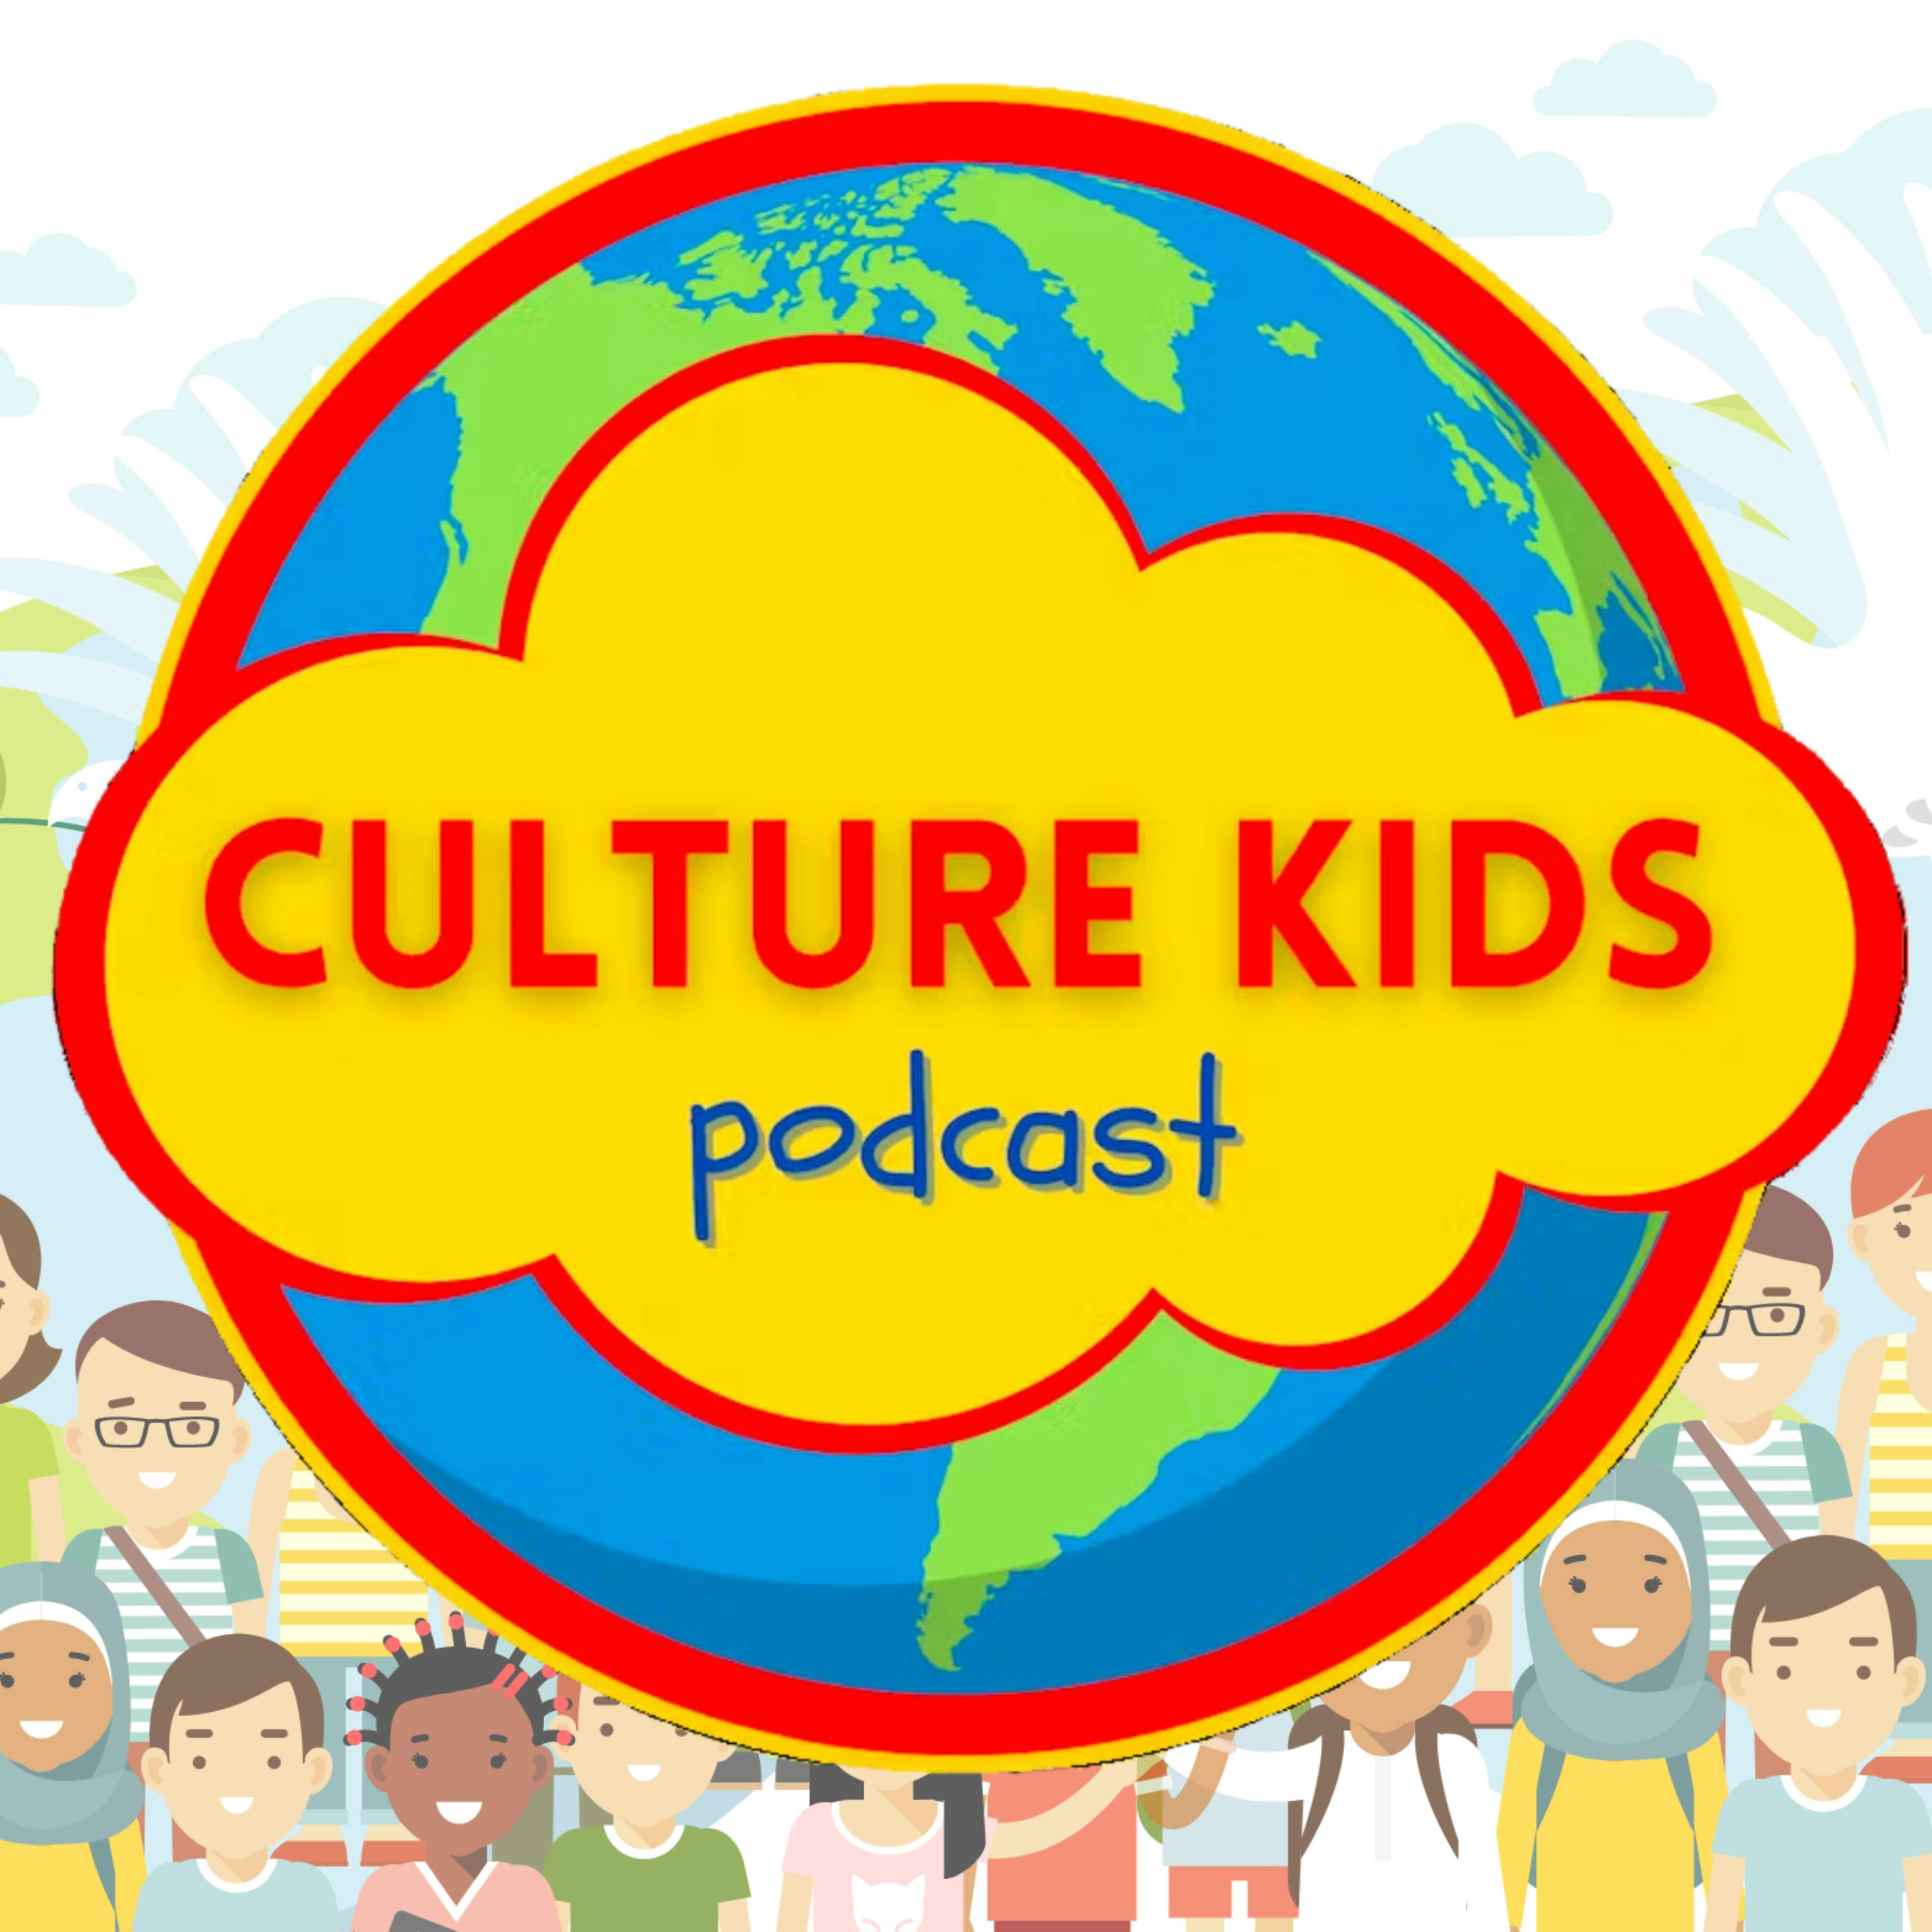 Culture Kids Podcast podcast show image